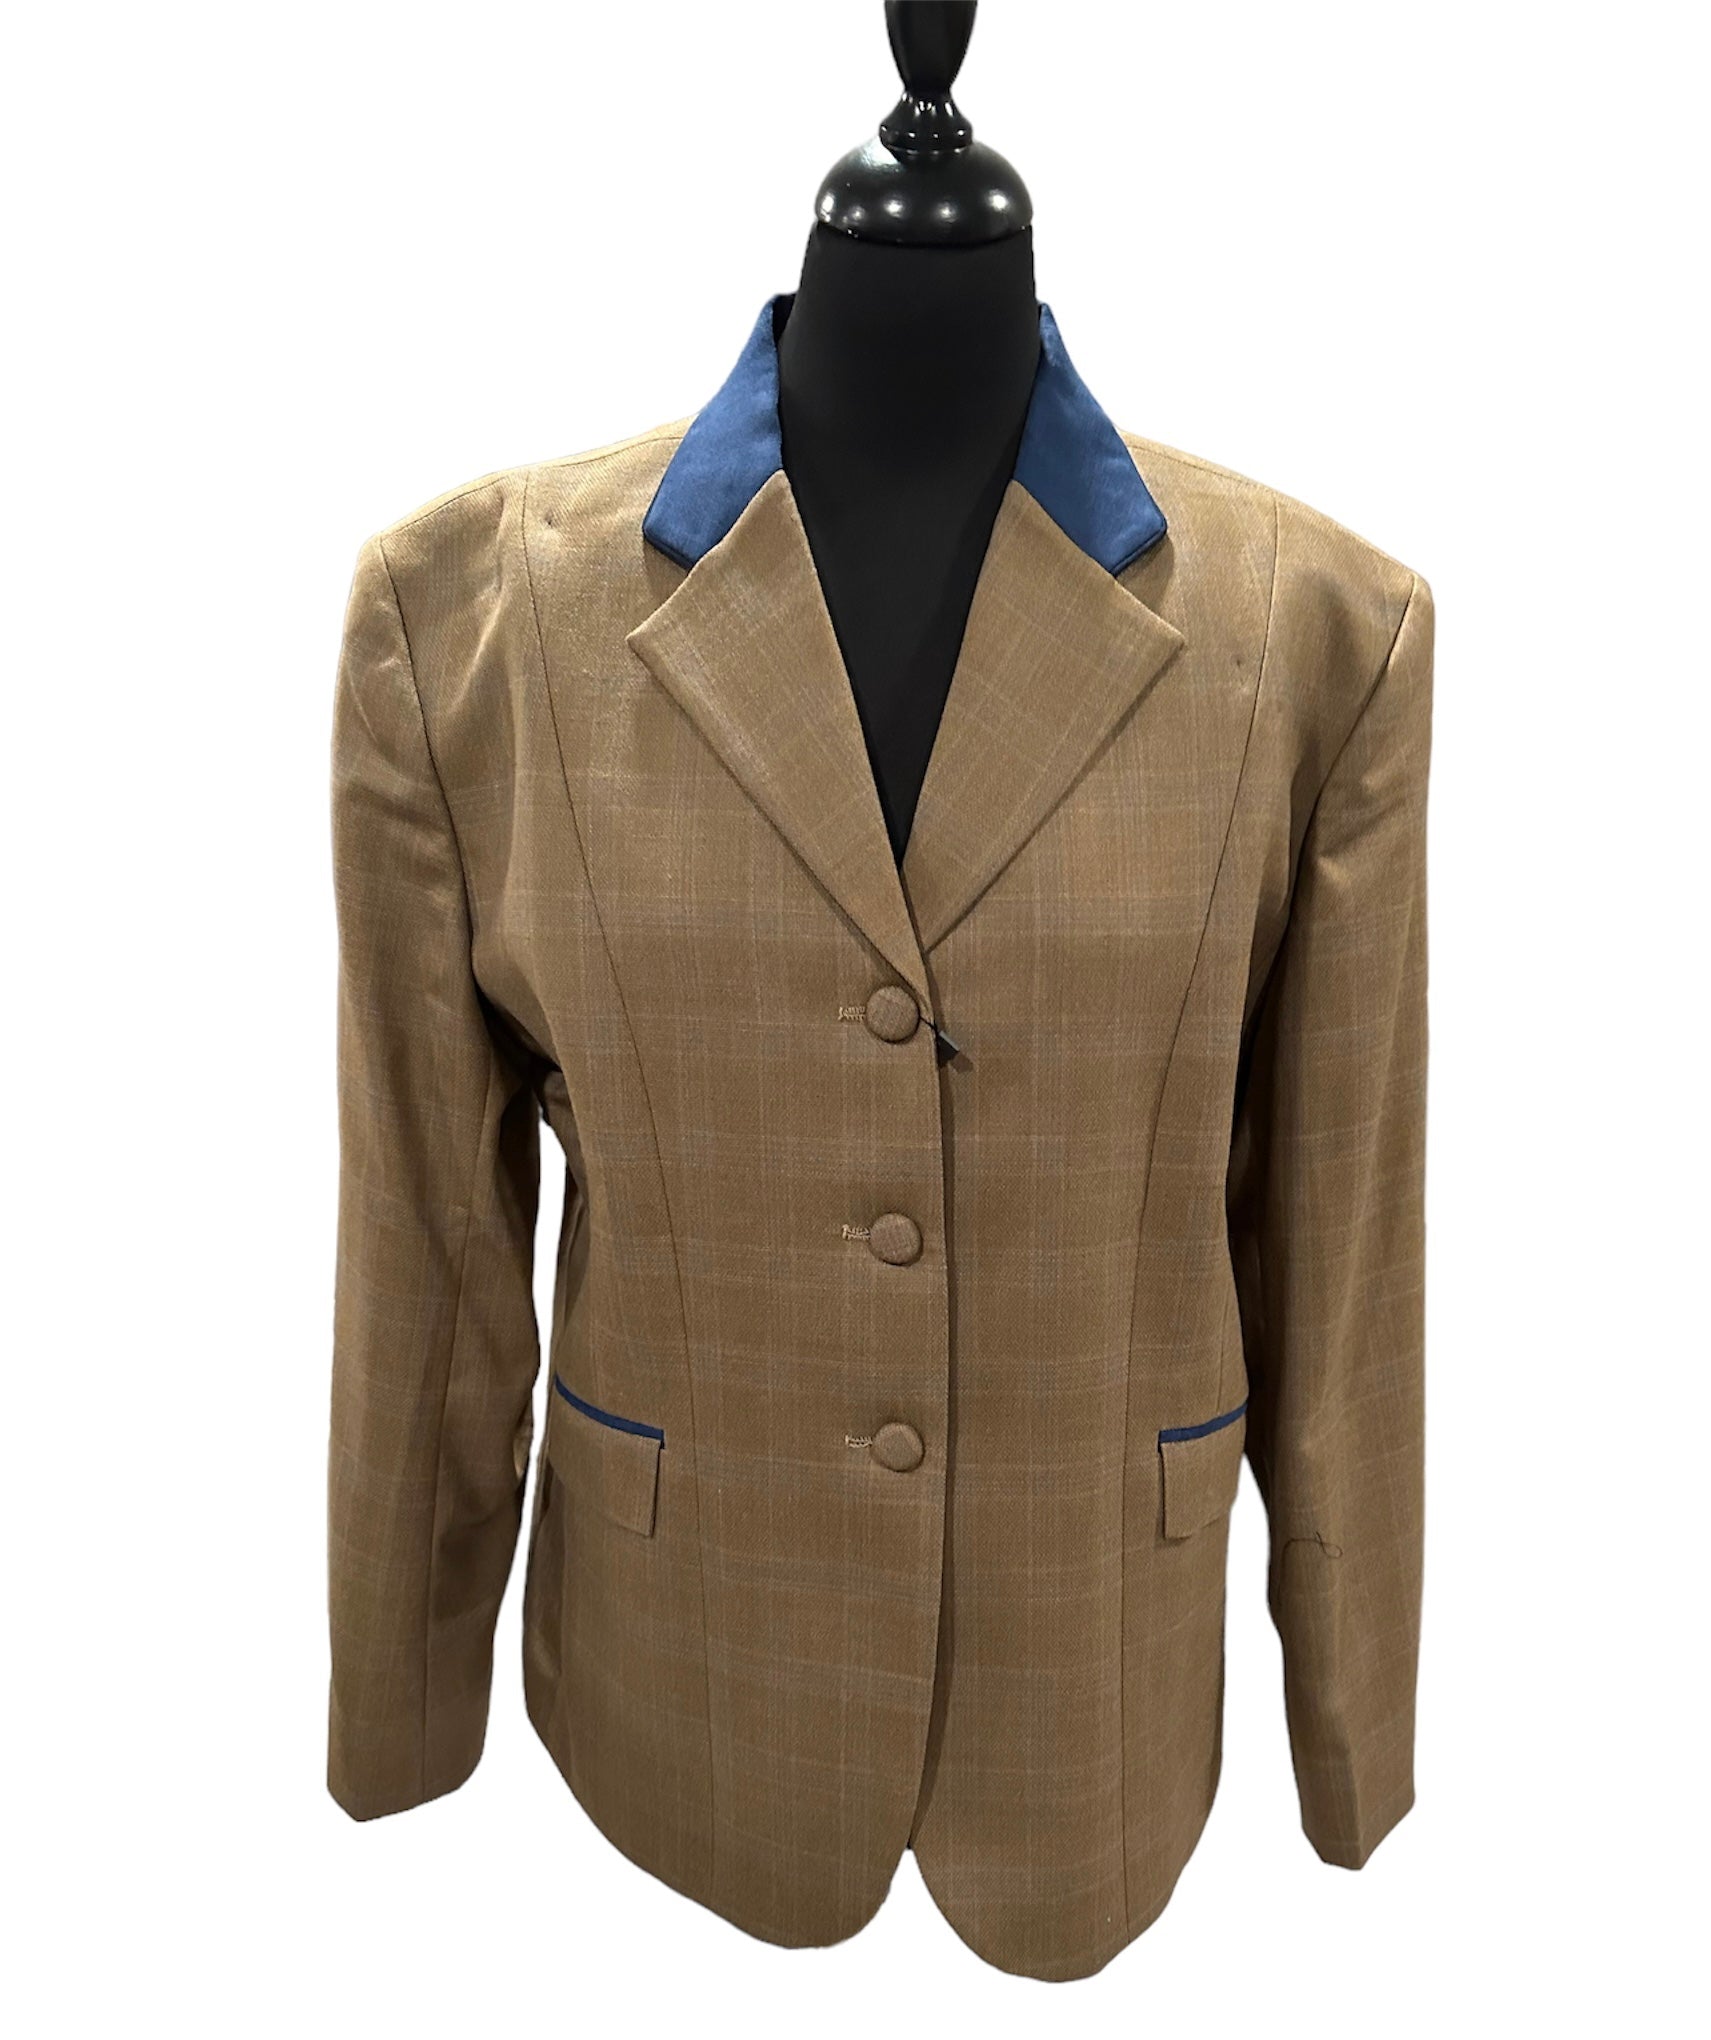 English Show Coat Tan with Navy Suede Collar Fabric Code MD1111209